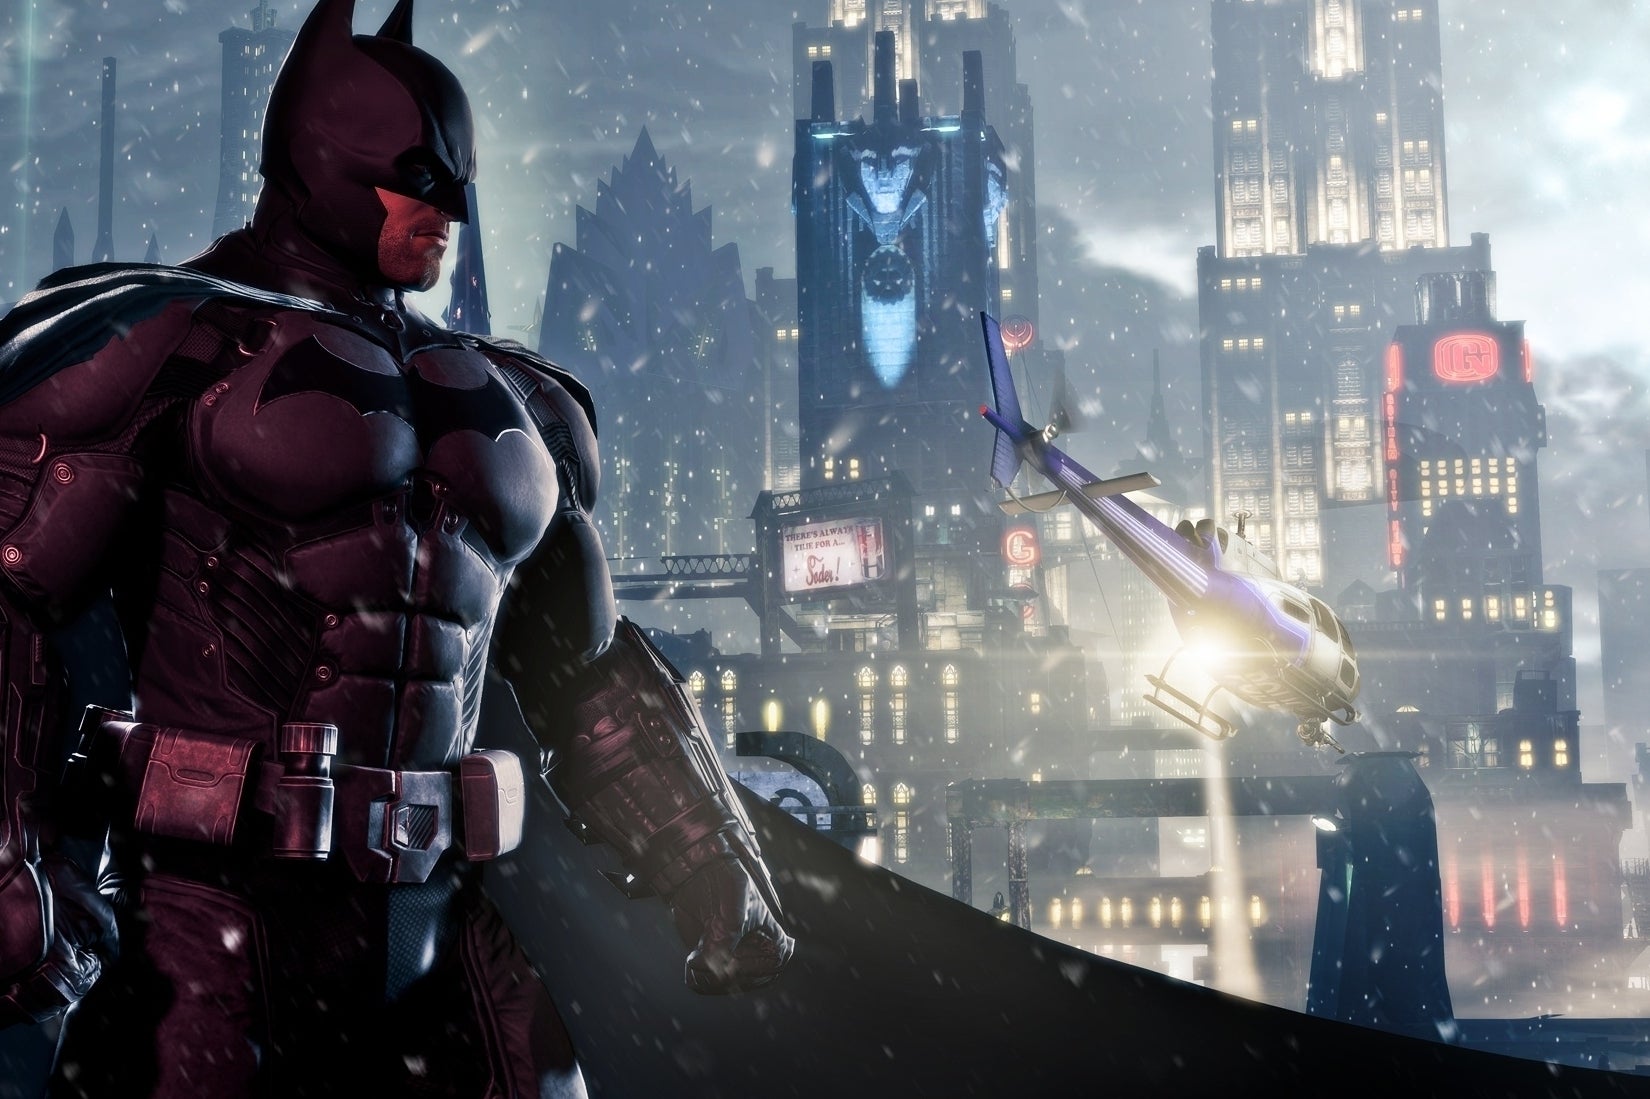 Image for Kevin Conroy Batman confusion continues with deleted “new Arkham game” tweet